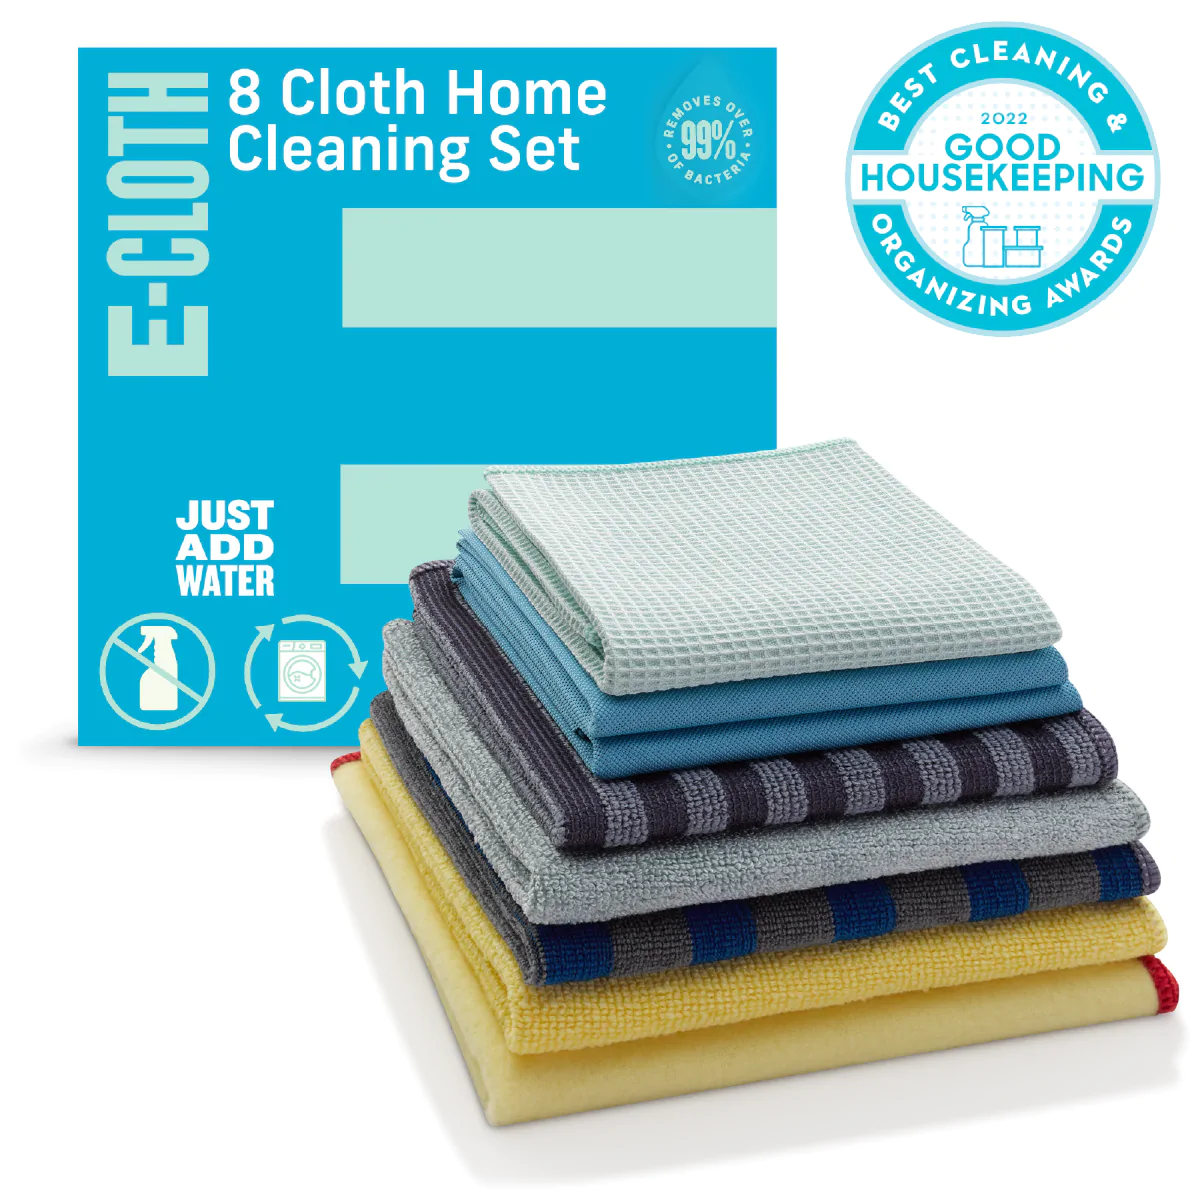 cleaning tools and products: E-Cloth 8 Cloth Home Cleaning Set